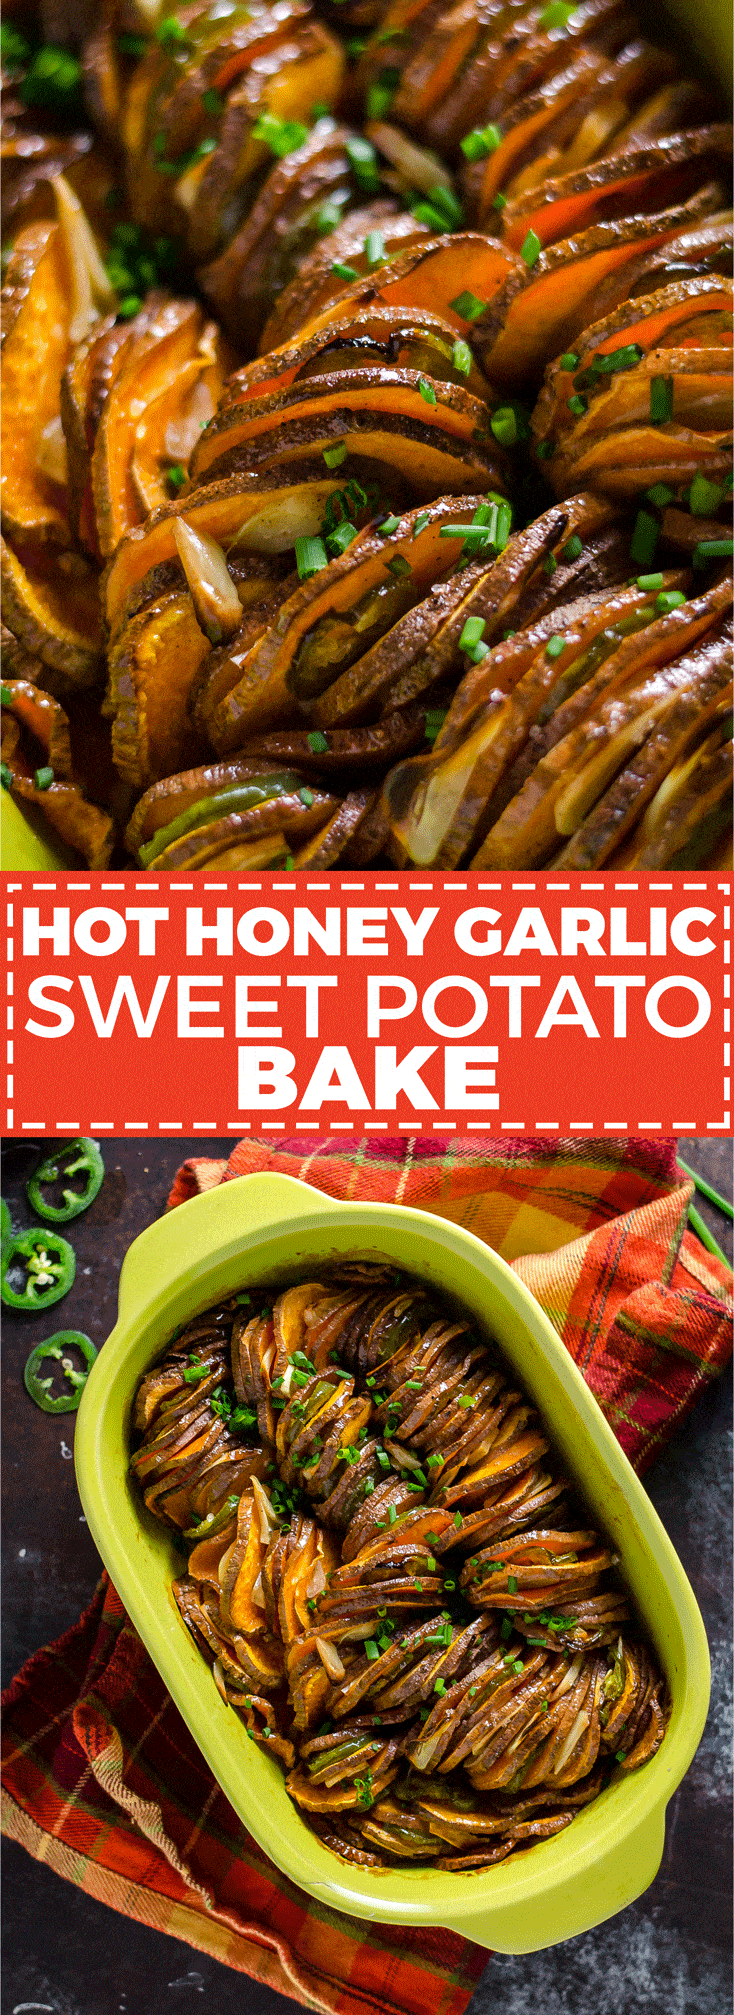 Hot Honey Garlic Sweet Potato Bake. Jalapenos, garlic, honey, and butter flavor this delicious and simple-to-make side dish. | hostthetoast.com